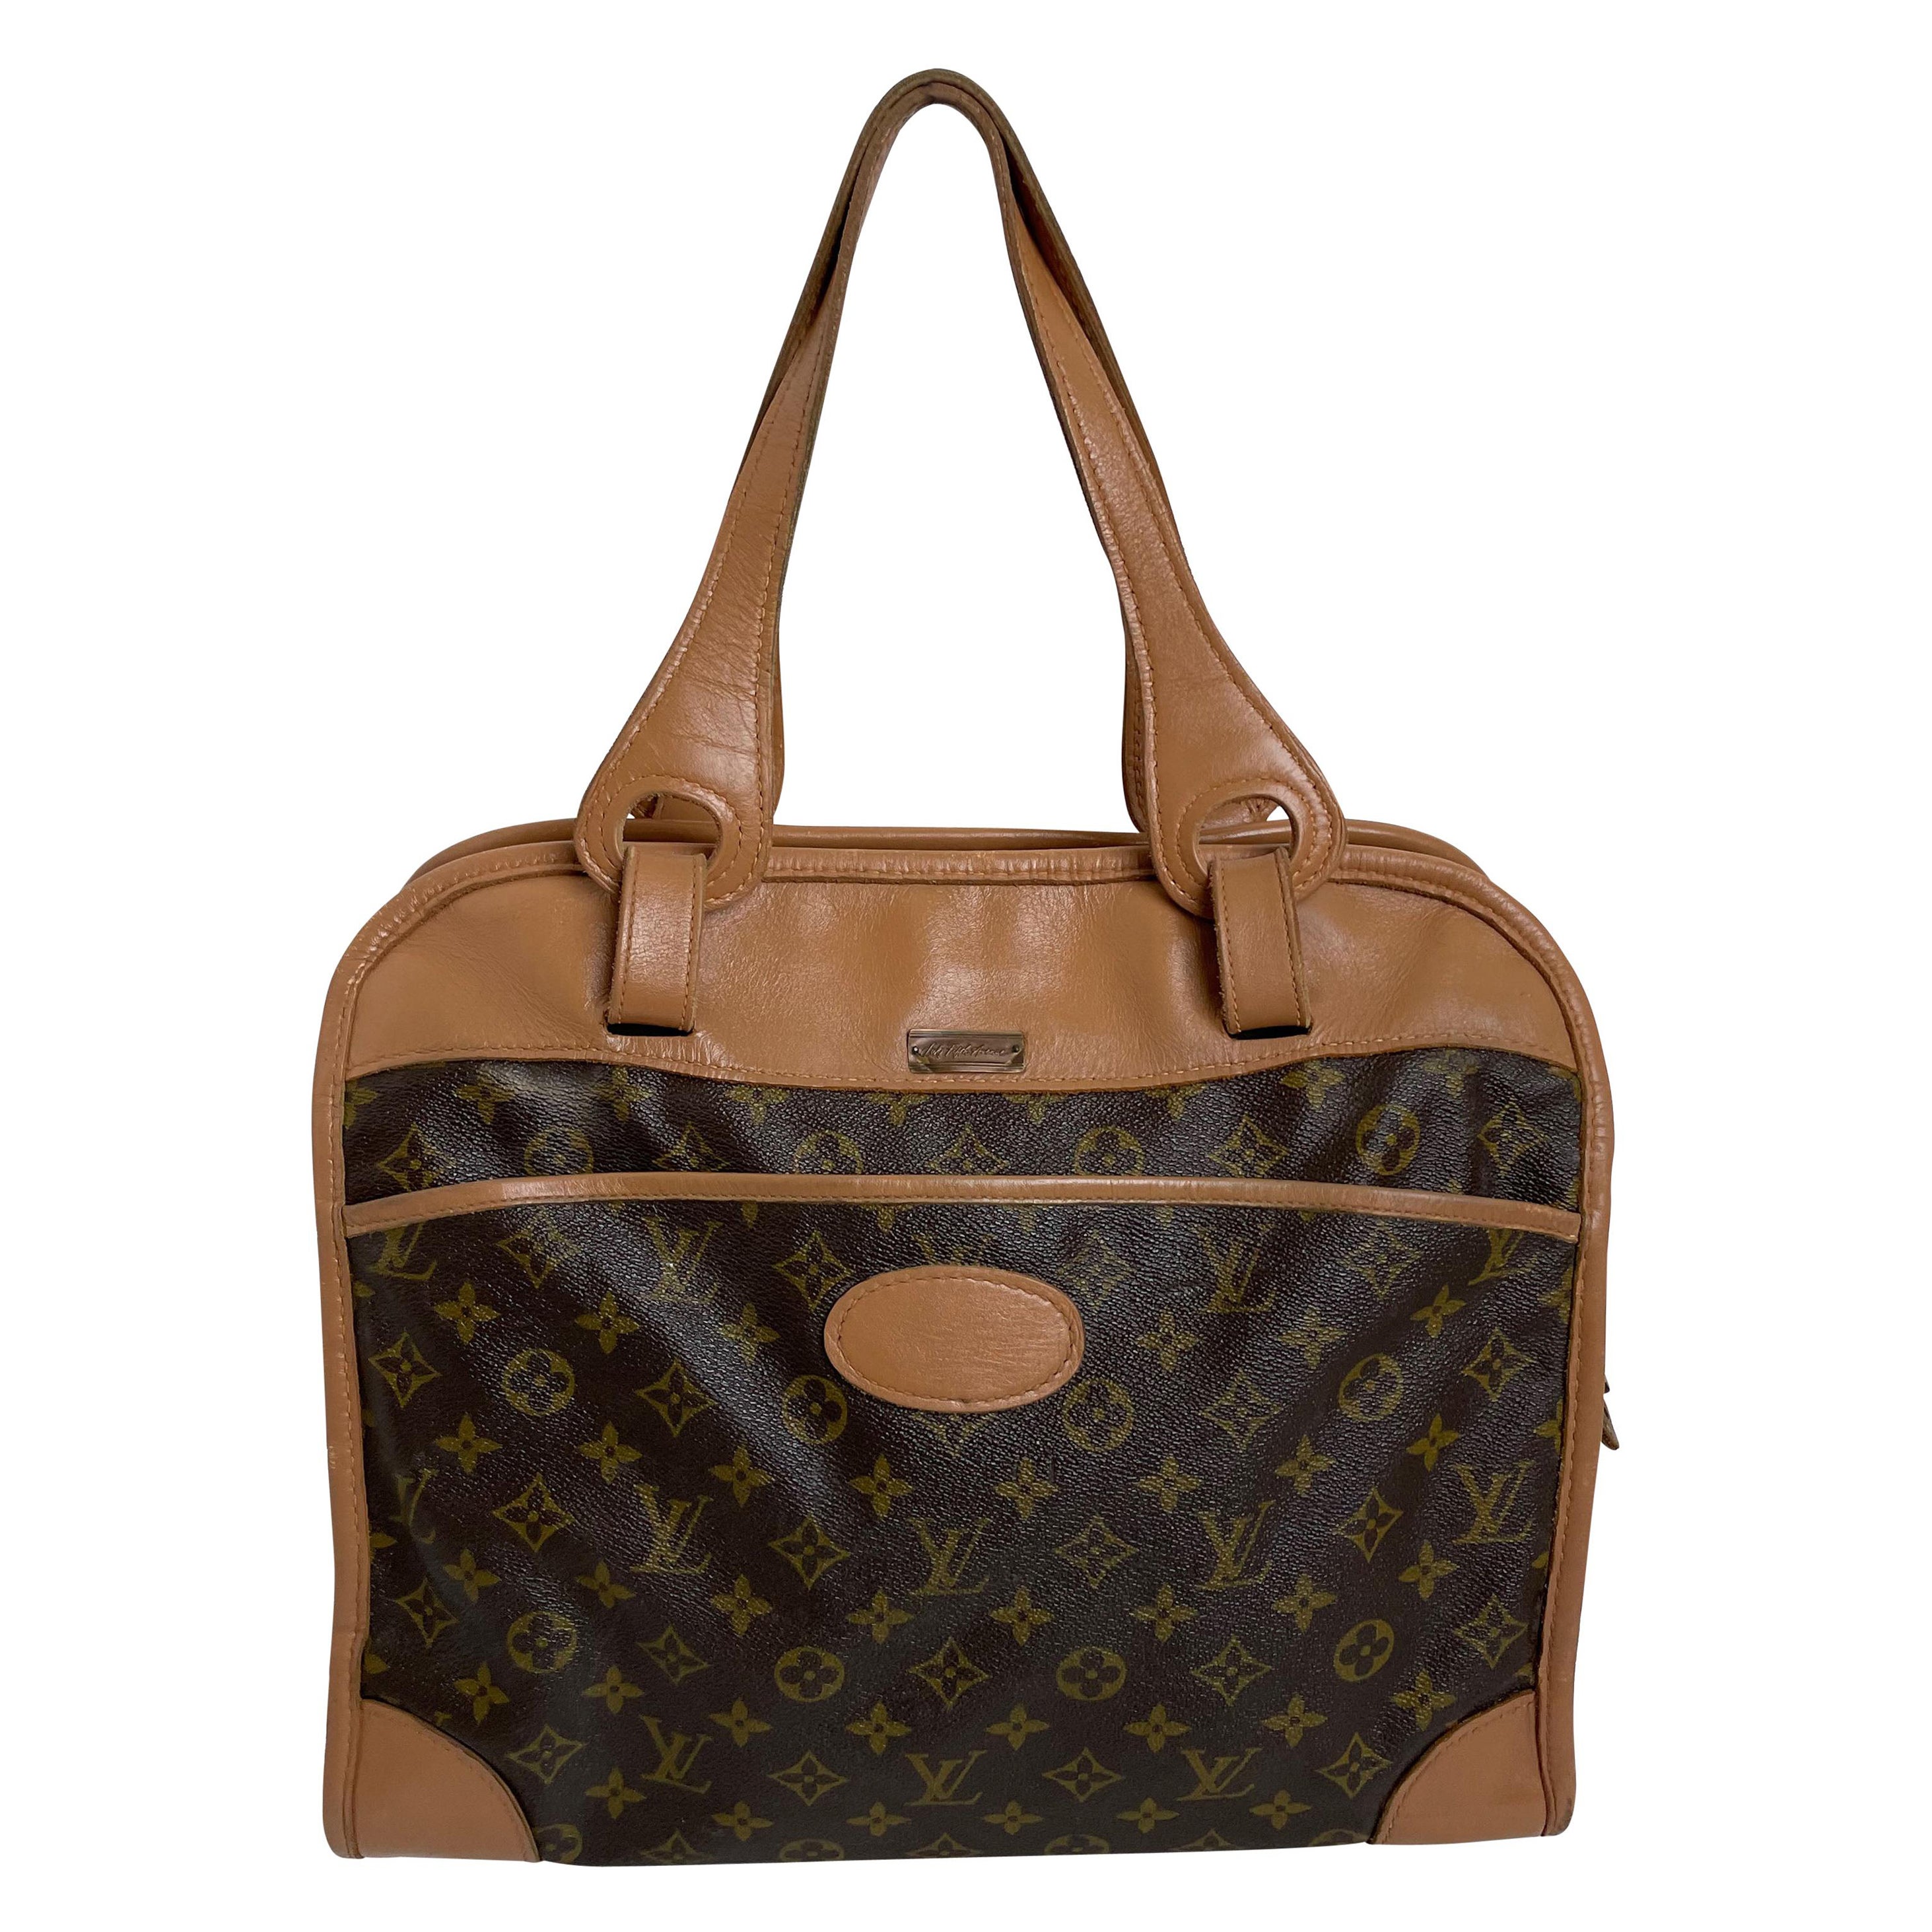 Louis Vuitton Tote Bag Travel Carry On French Luggage Co Saks 5th Ave Vintage  im Angebot